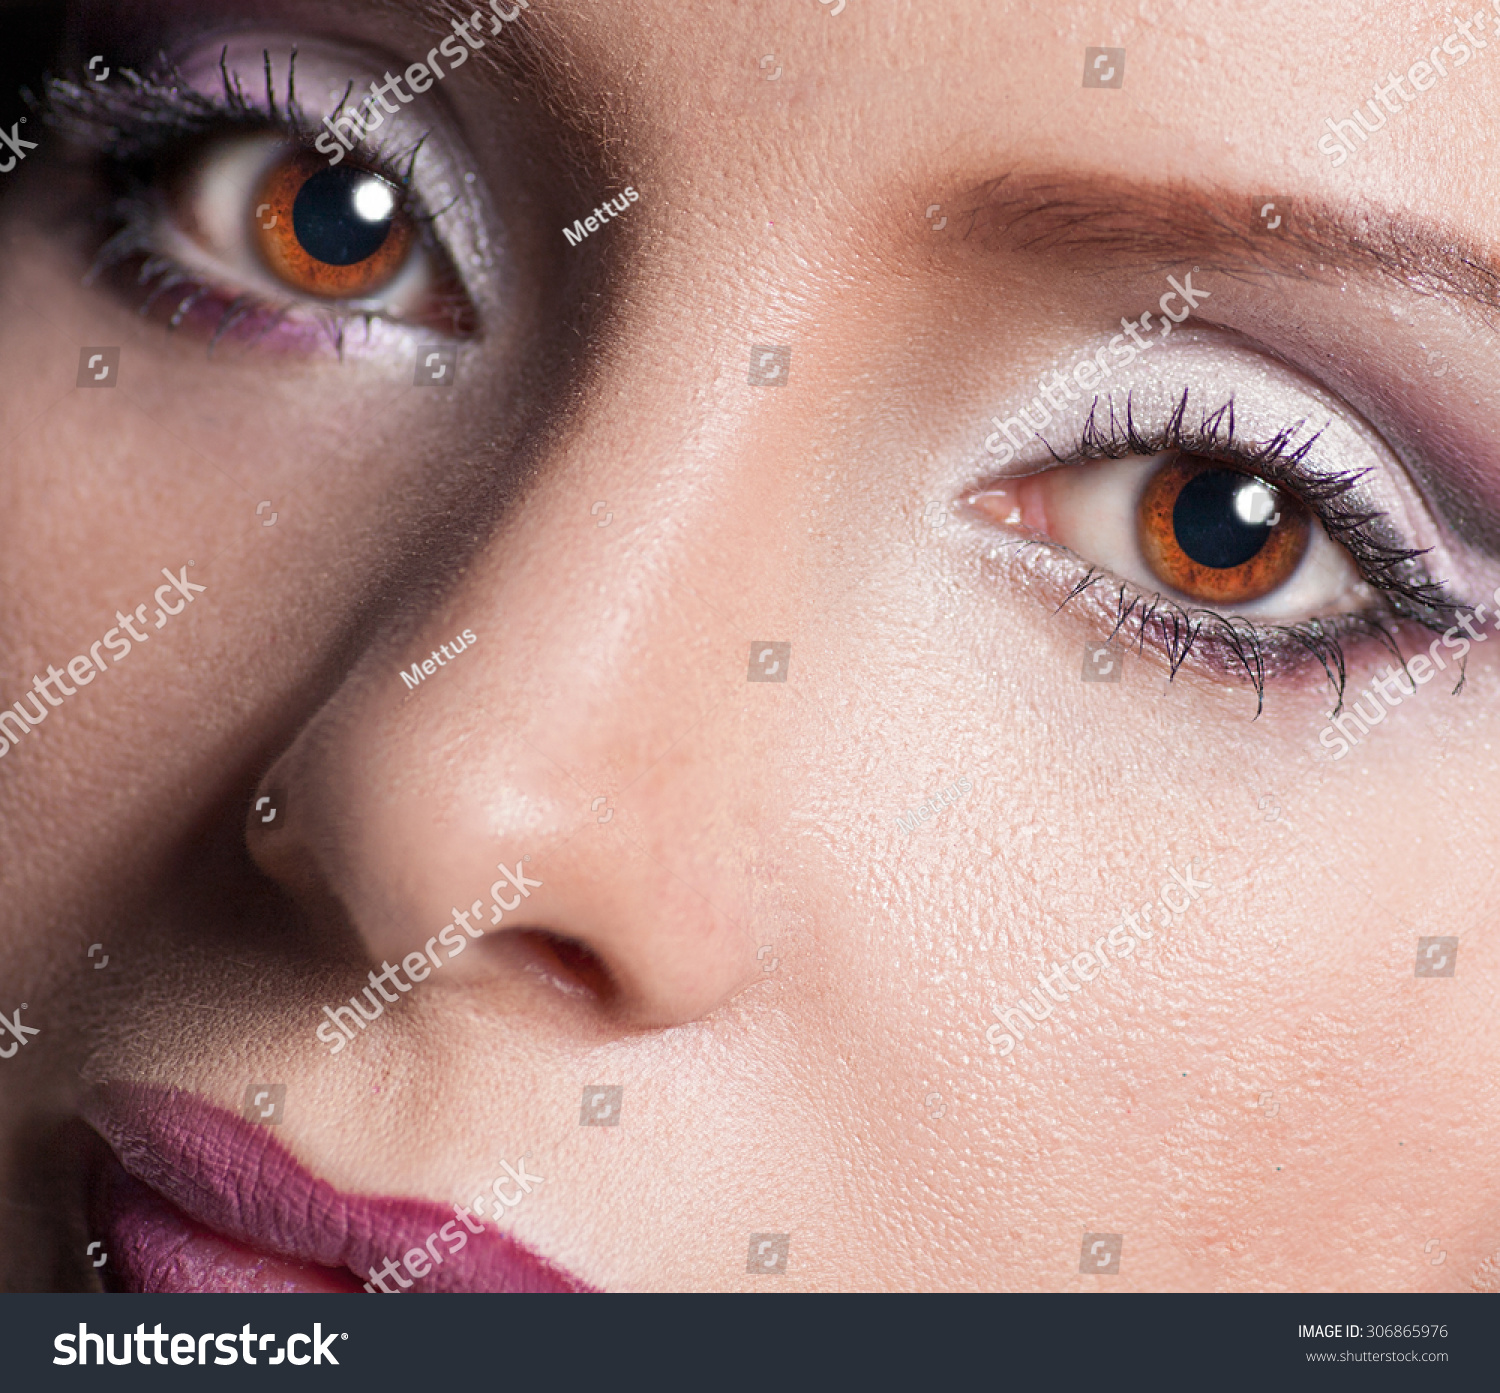 Eyes Nose Lips Part Face Image Stock Photo Edit Now